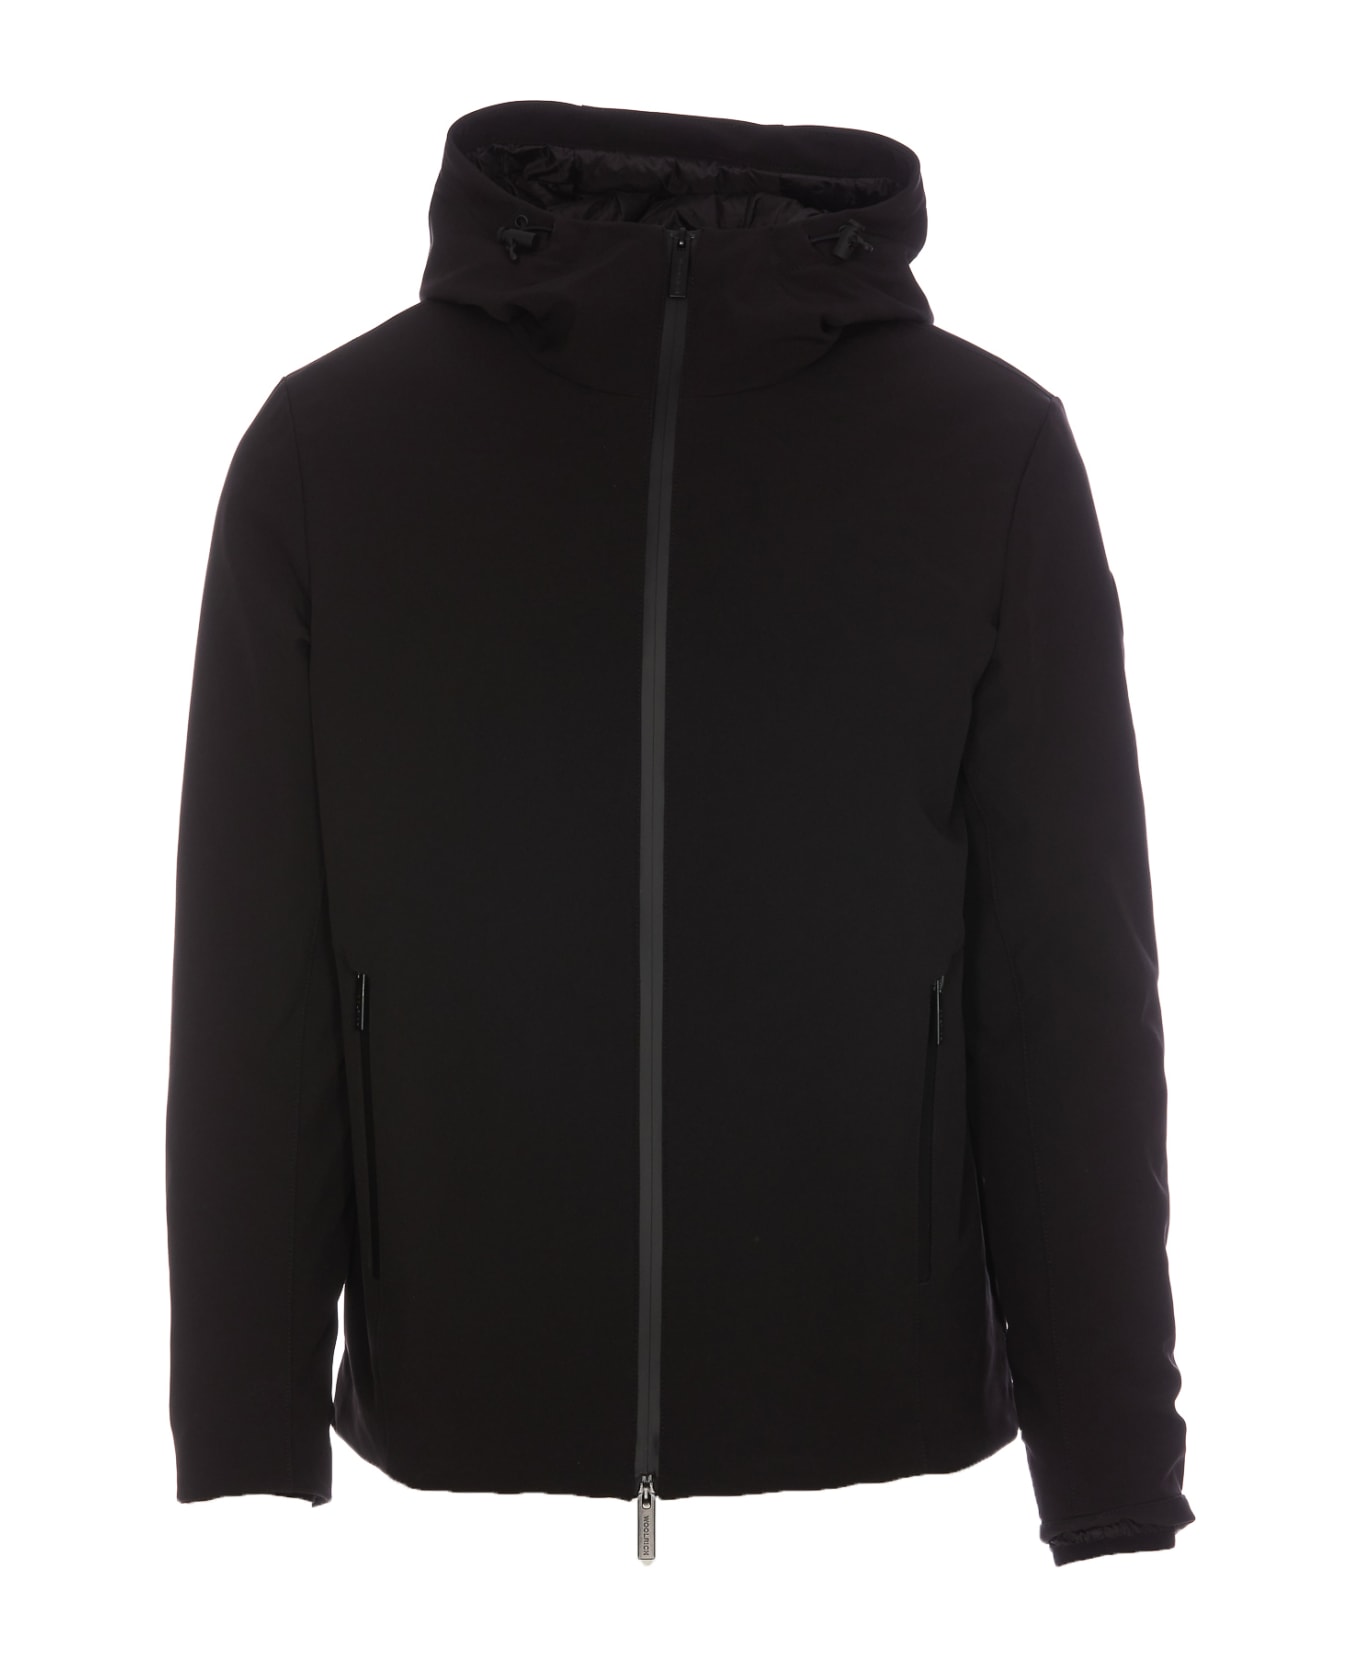 Woolrich Pacific Soft Shell Down Jacket - Black